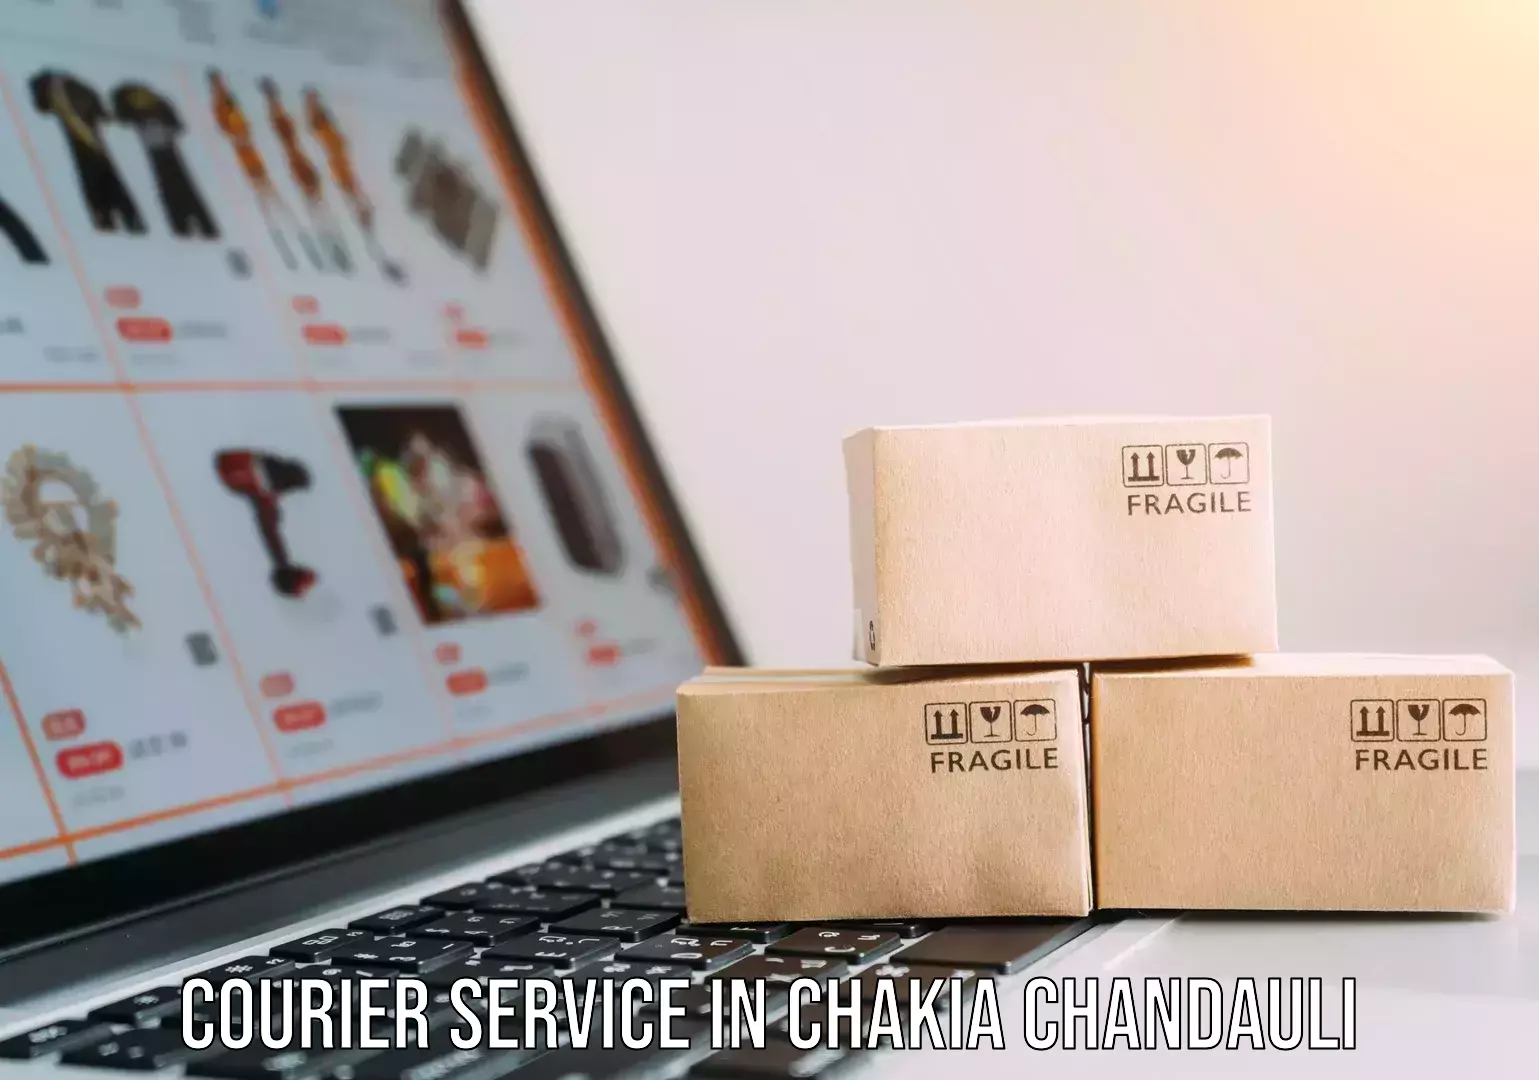 Personal parcel delivery in Chakia Chandauli